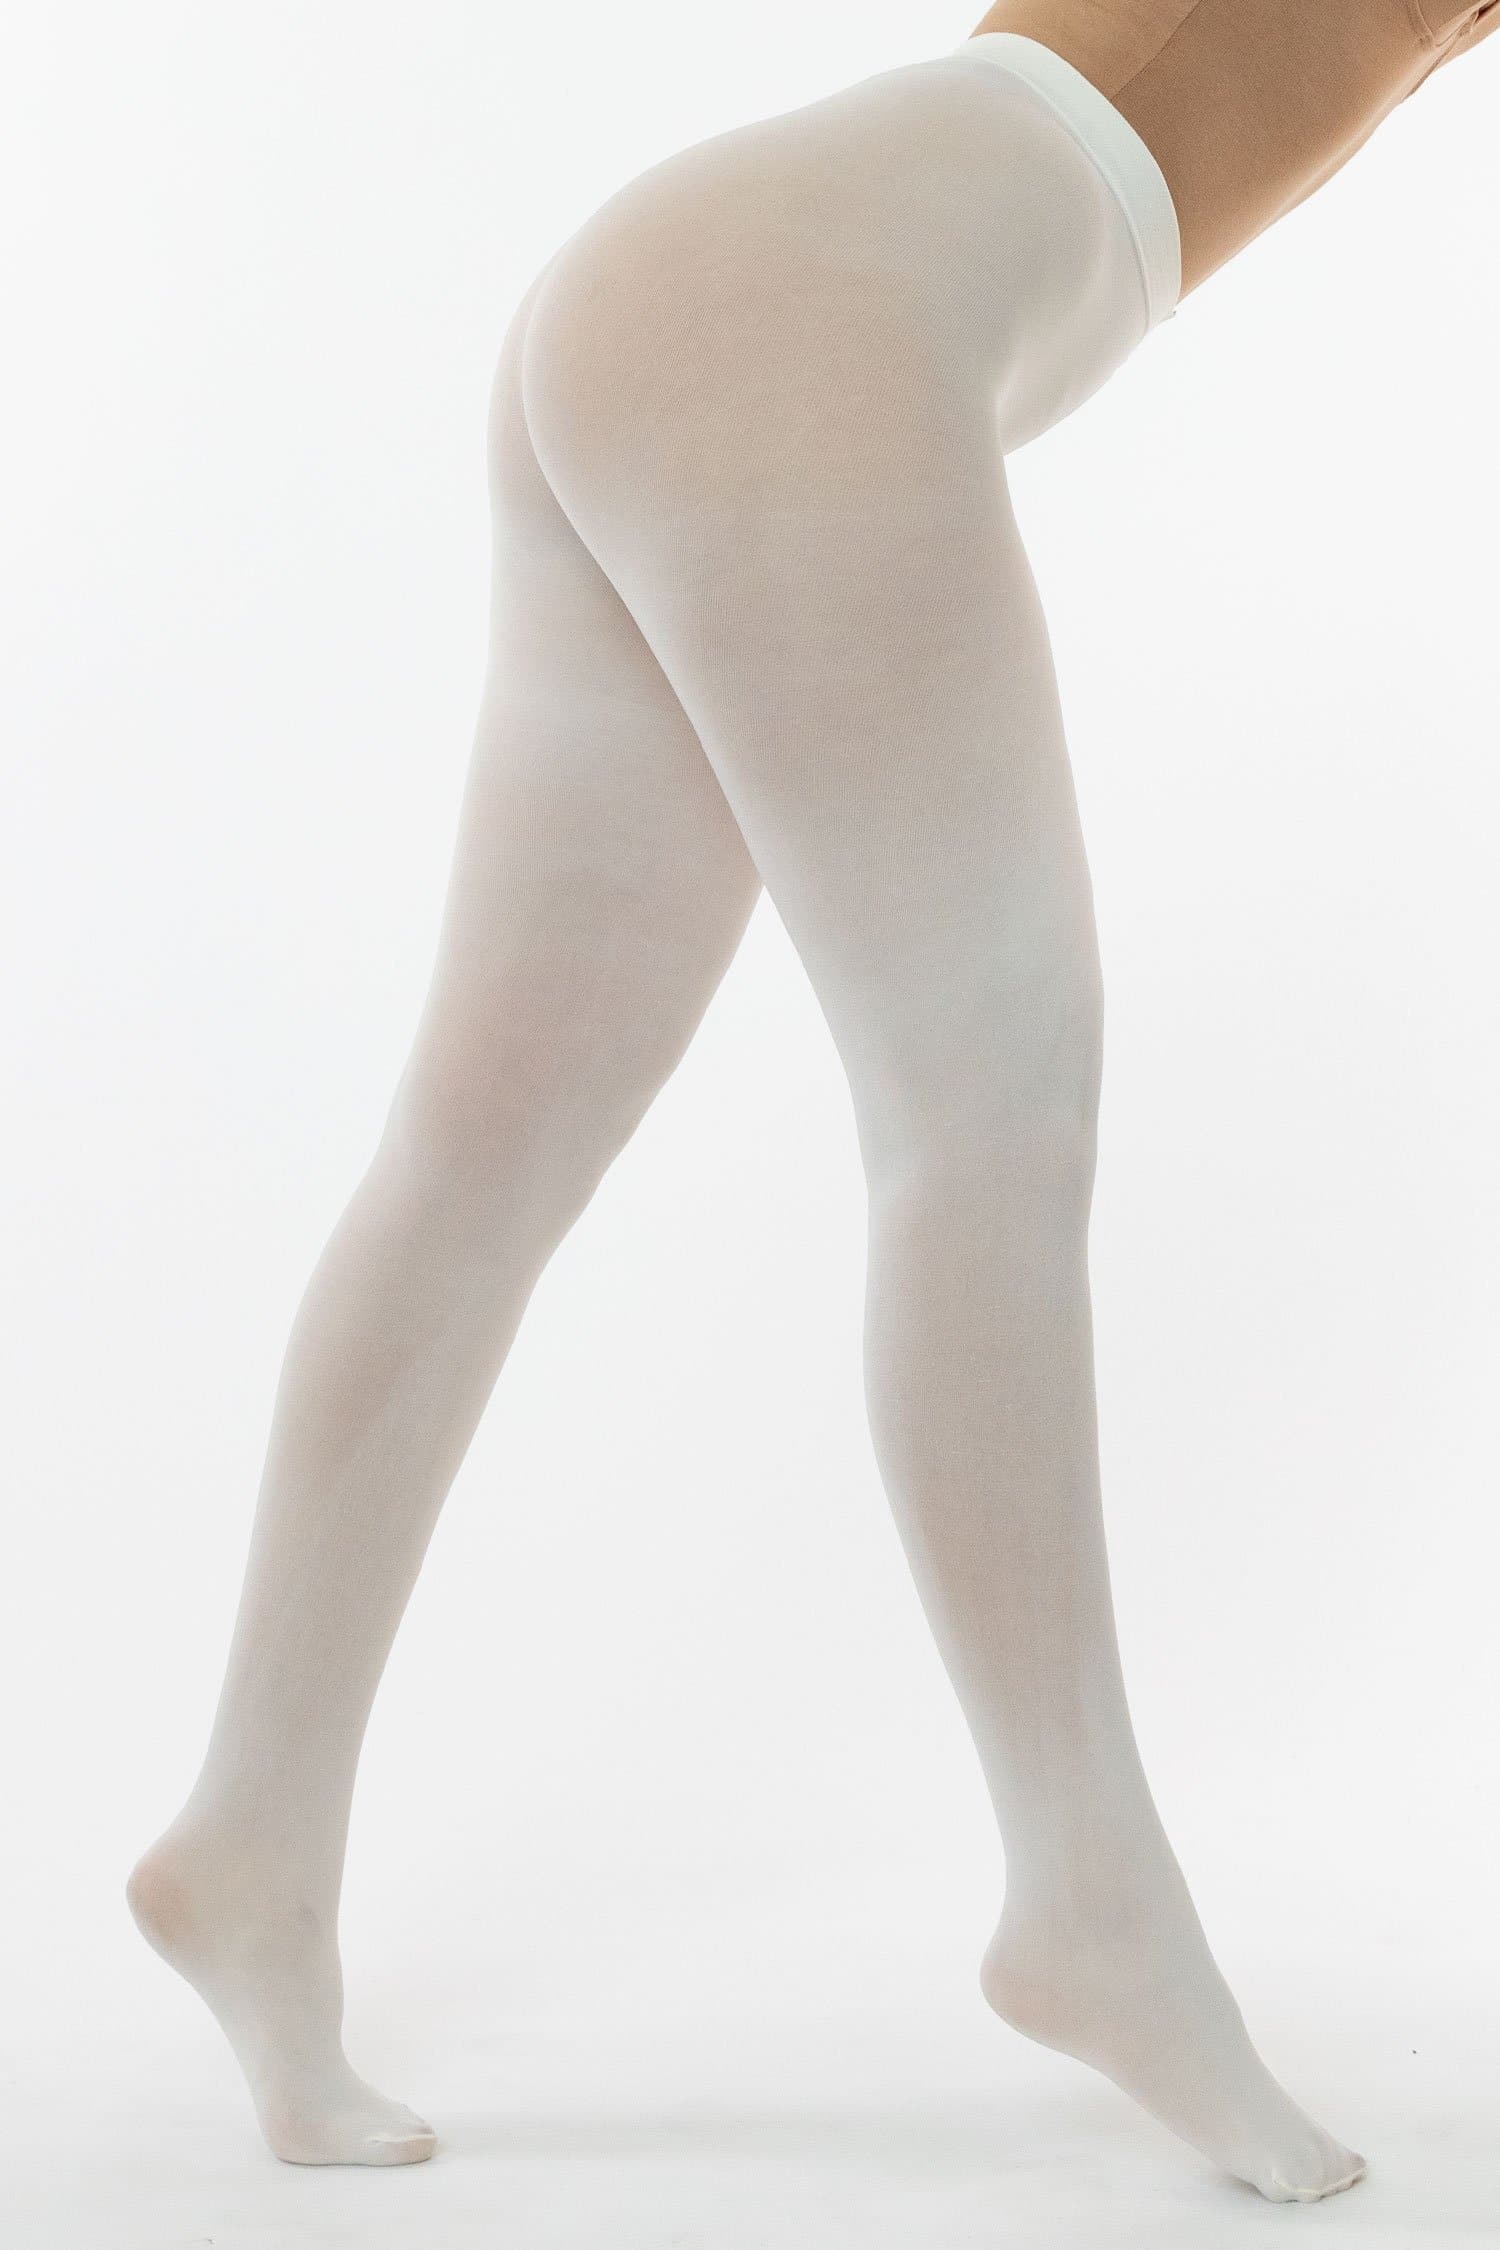 Women's Opaque White Tights